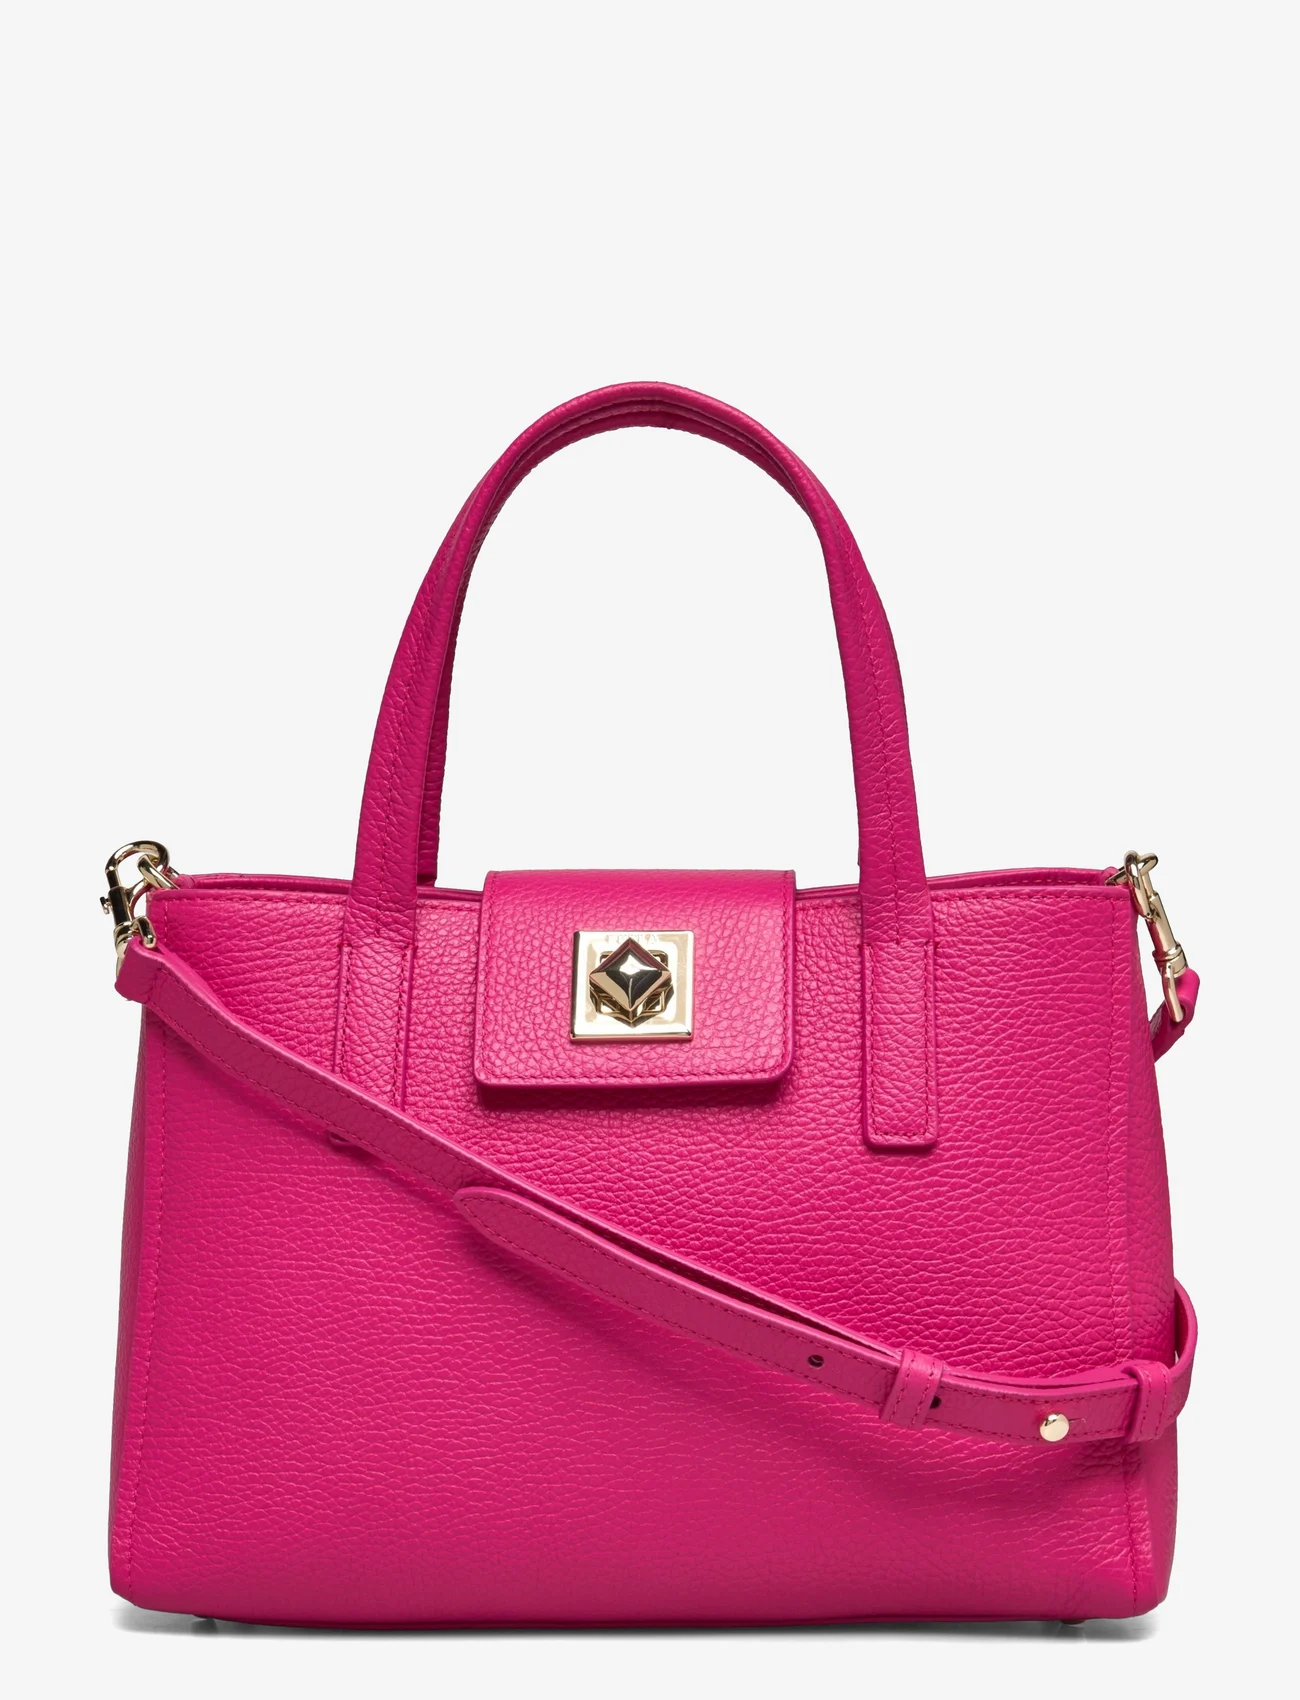 Furla - FURLA PALOMA M TOTE - party wear at outlet prices - pop pink - 0